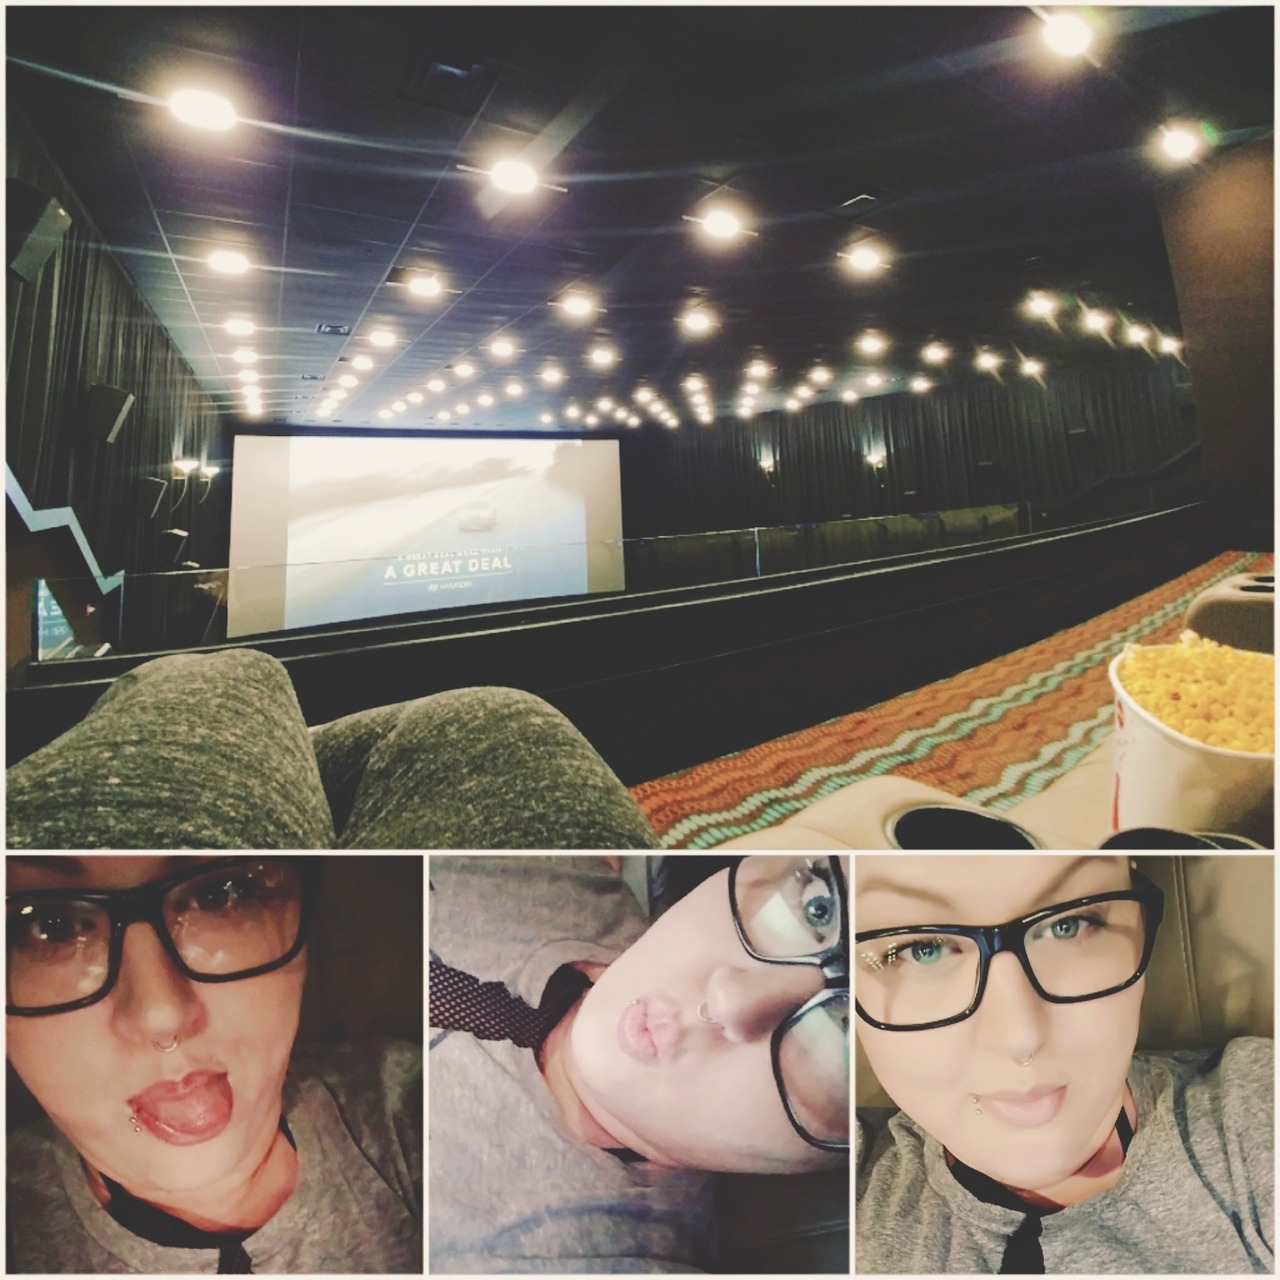 aidaaid: Attempt #2 😂😂😂  Loving the new AMC theater with recliners!!! ❤💜💙💚💛